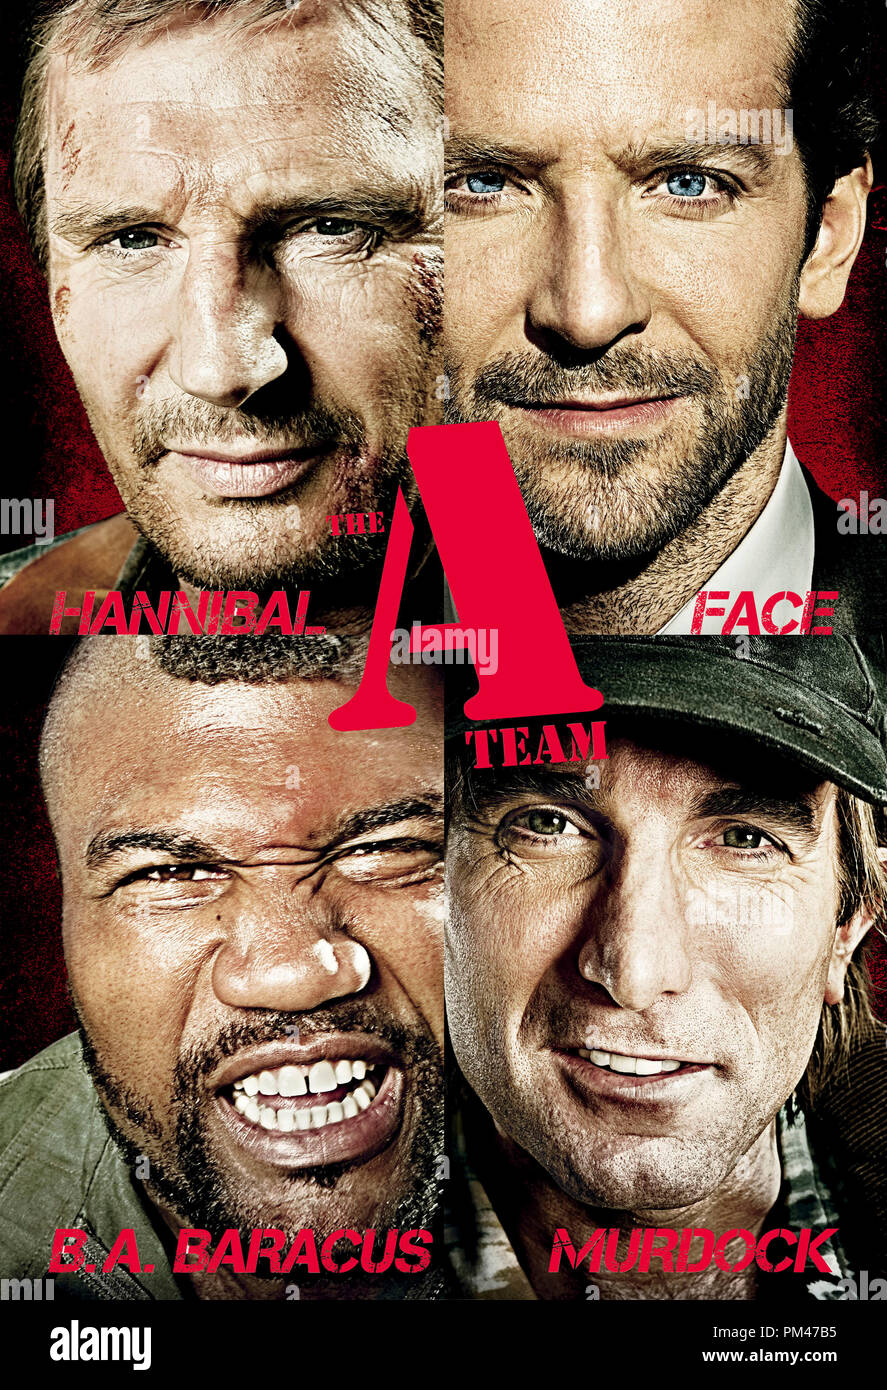 The A-Team 2010 Poster Stock Photo